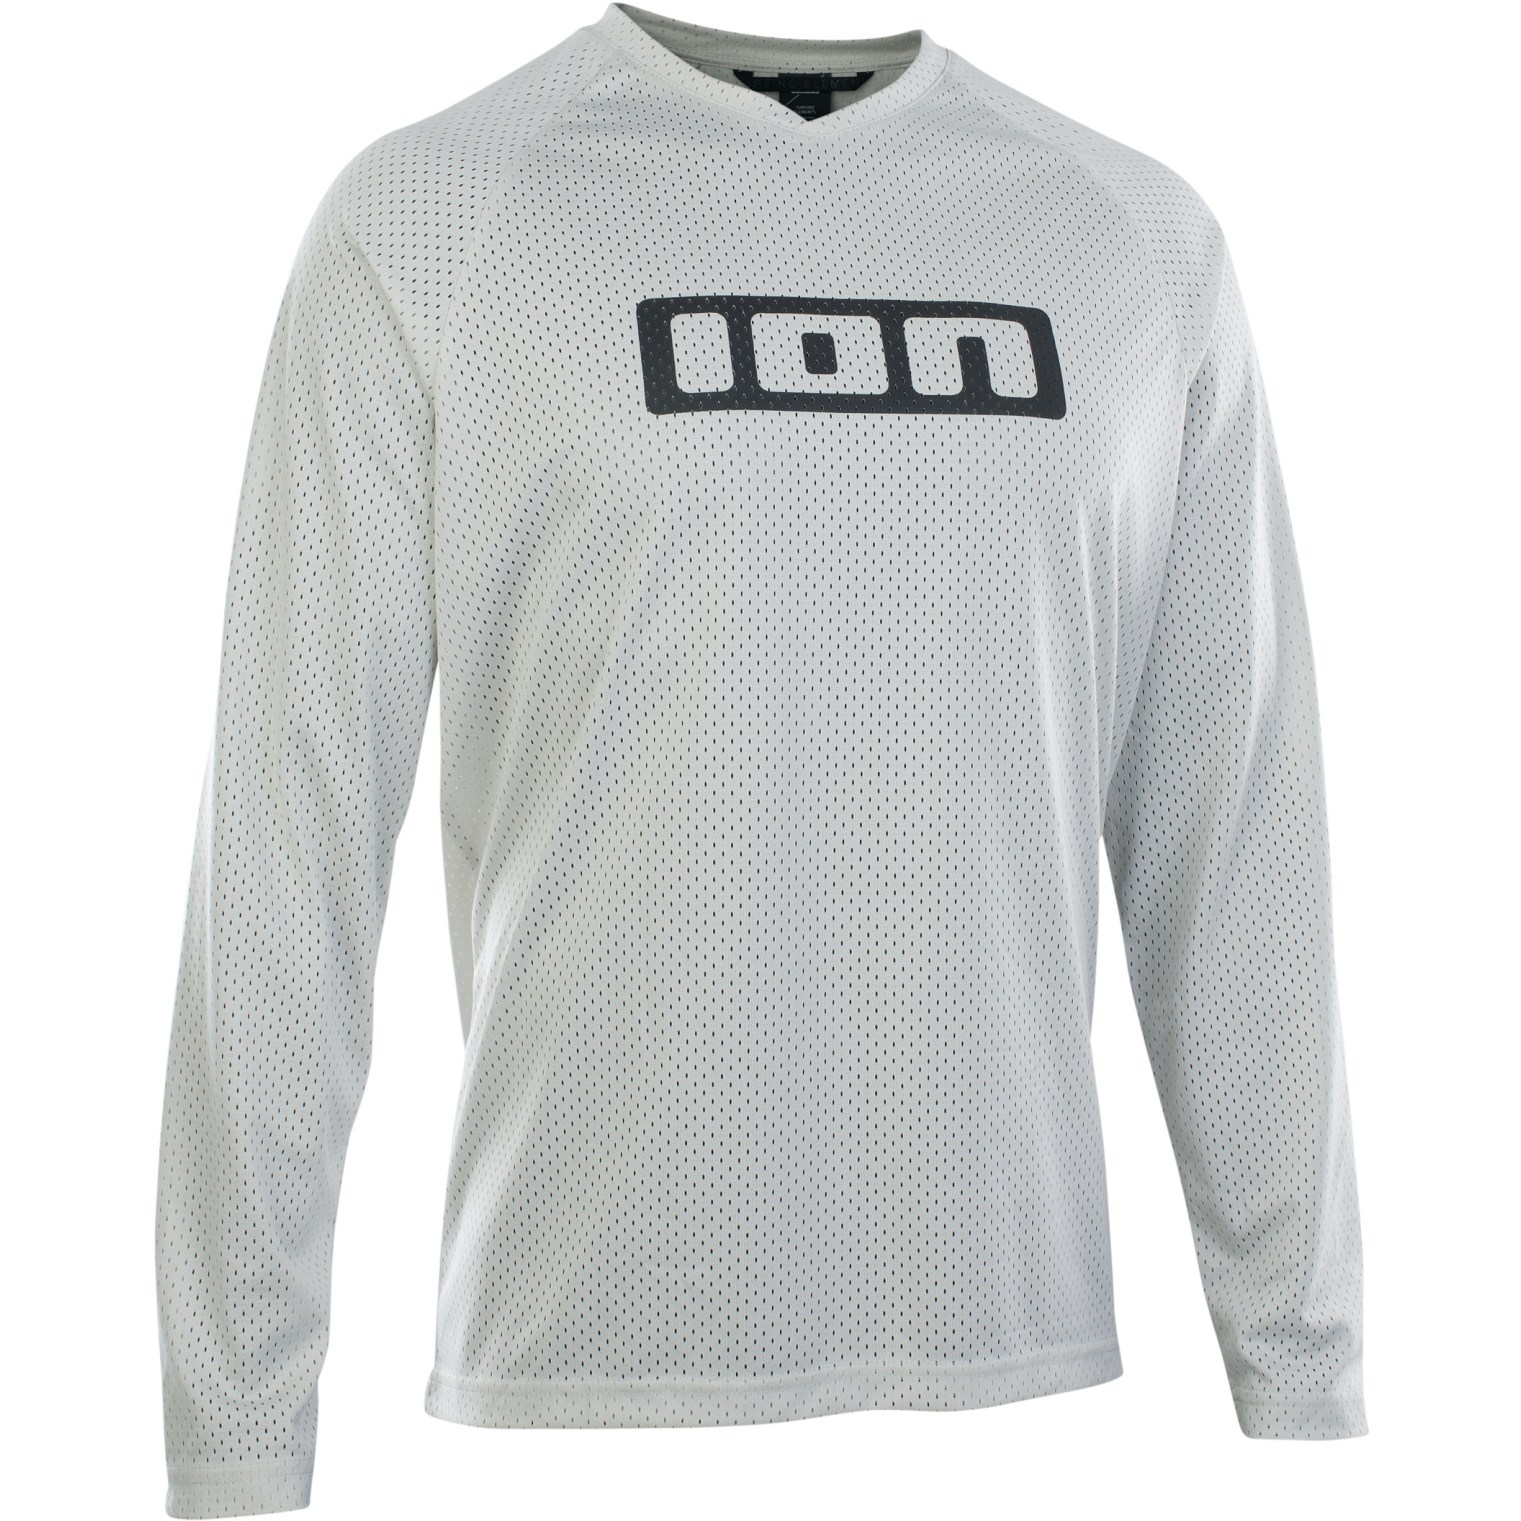 Picture of ION Bike Tee Long Sleeve Logo - Pale Blue